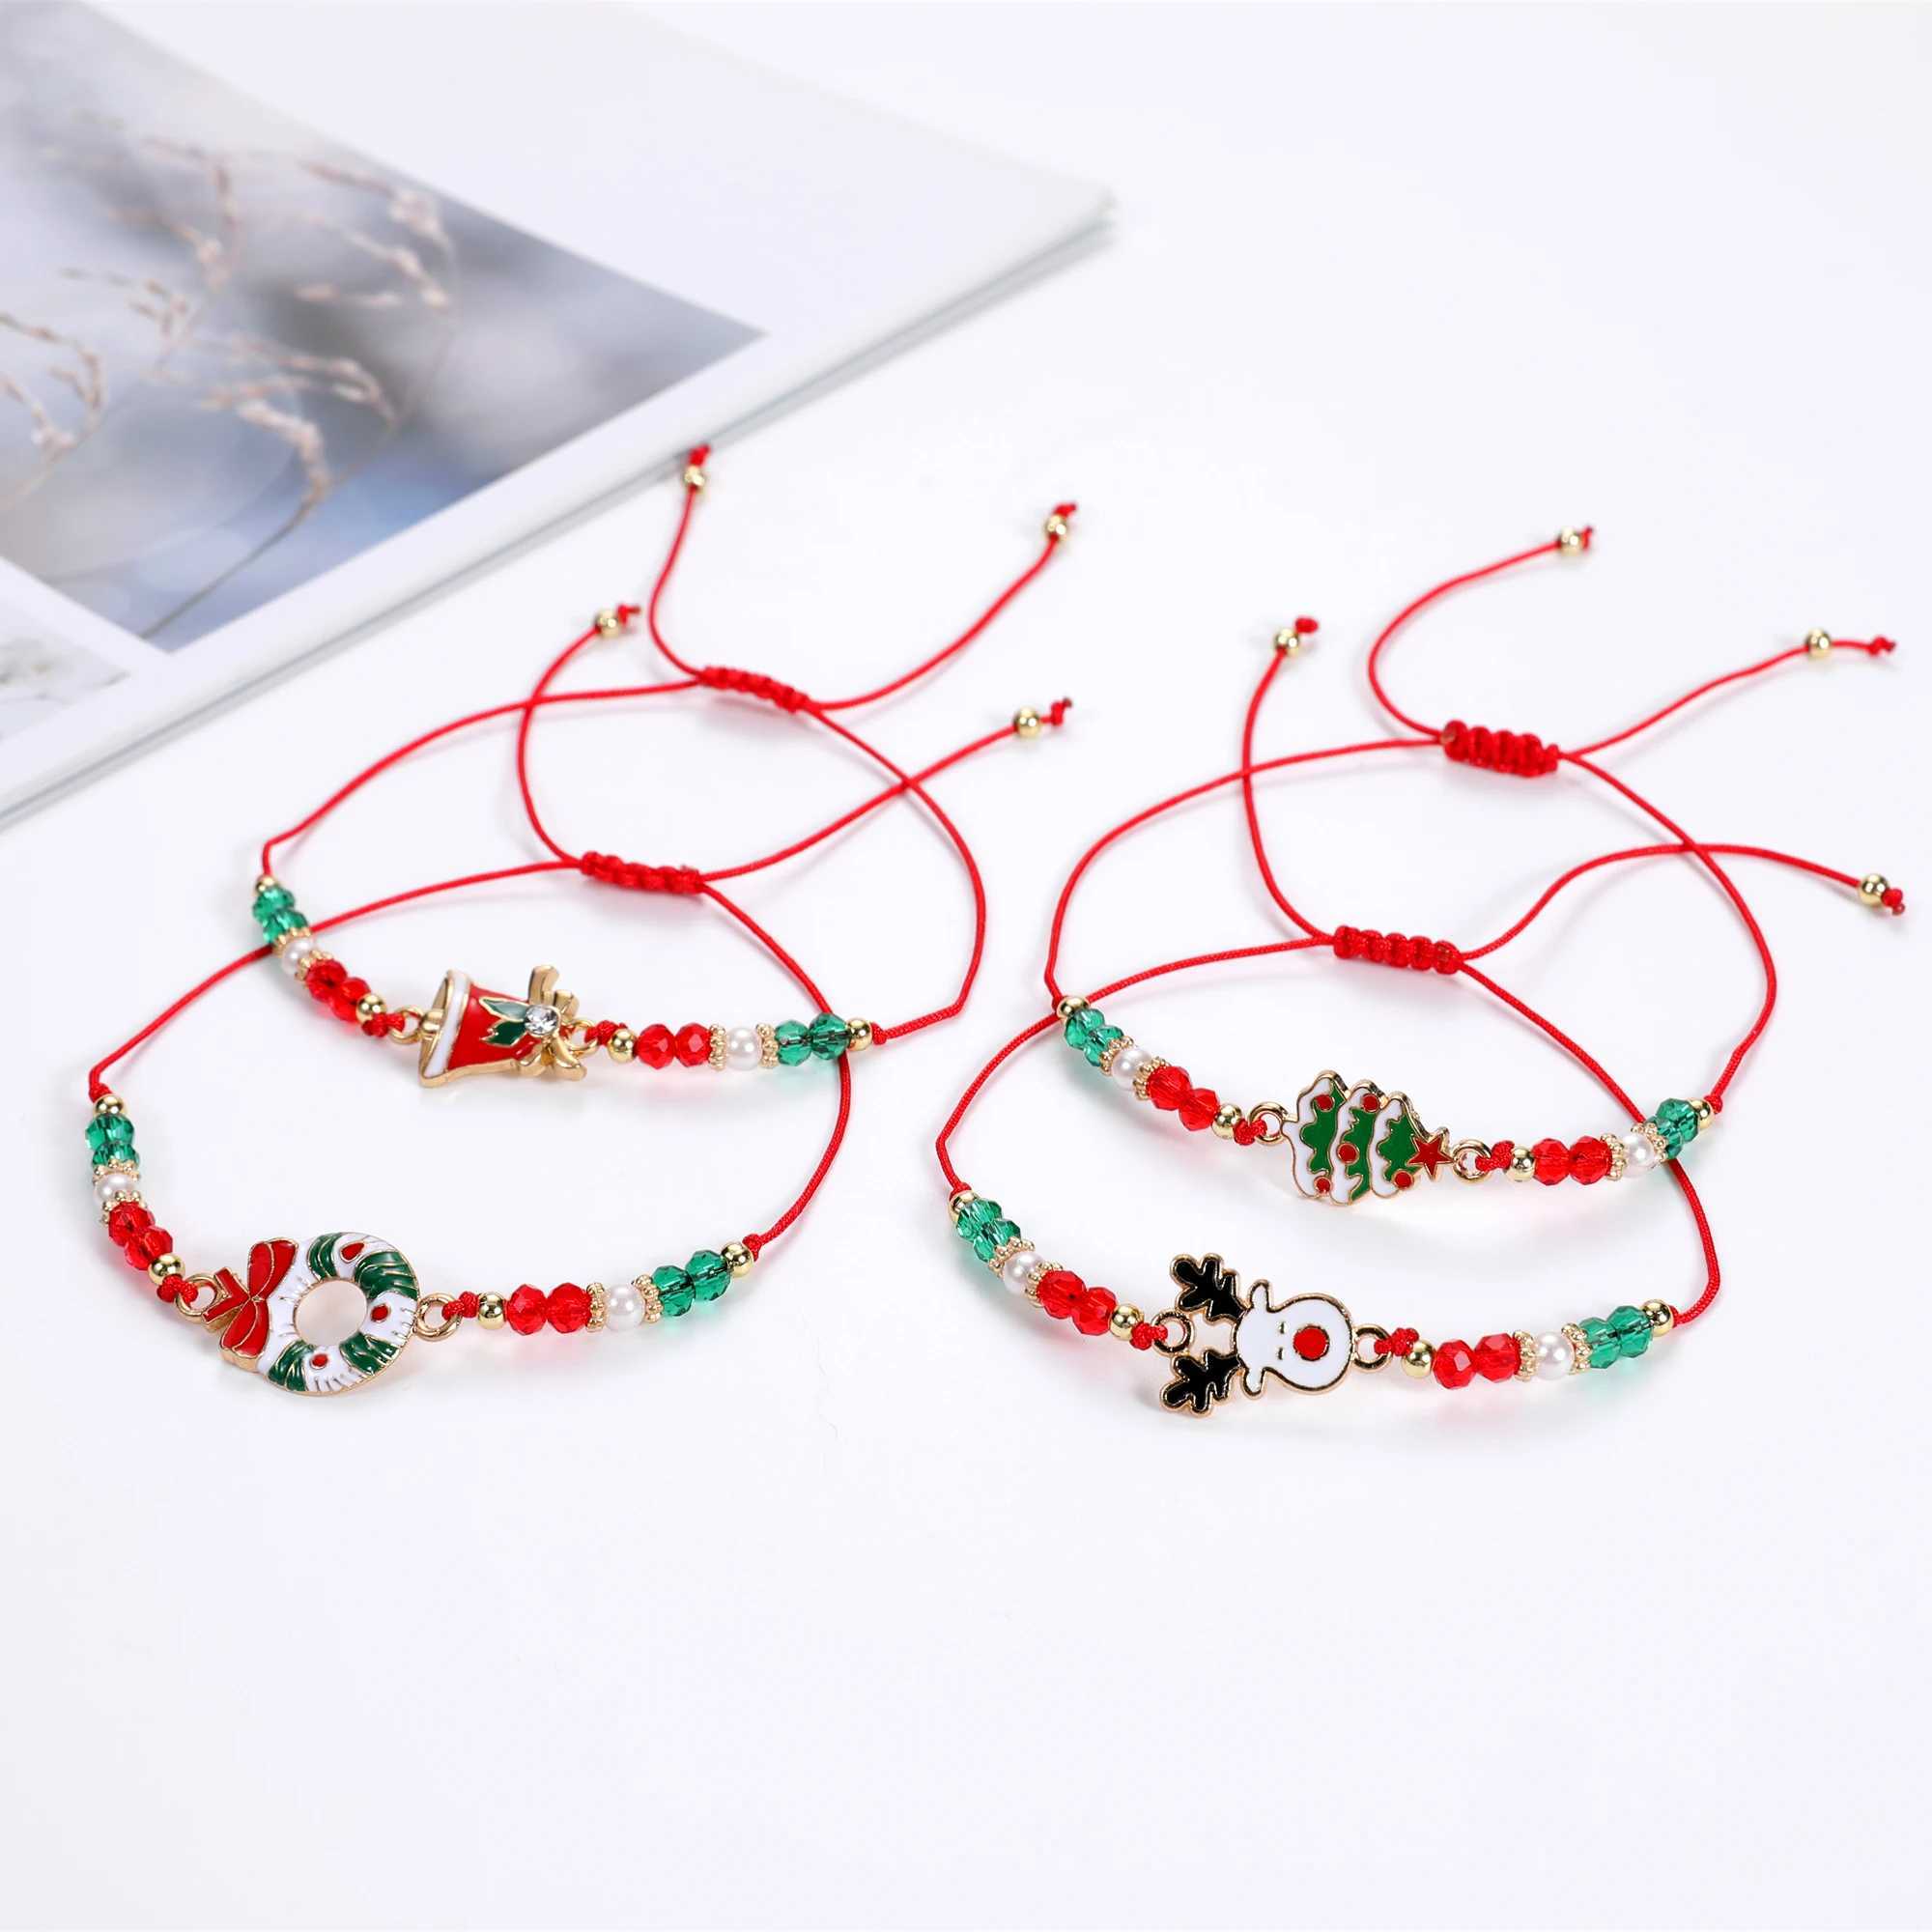 Chain Festival Christmas Bracelets Imitation Pearl Santa Claus Xmas Tree Pendant Party Jewelry Gifts for Girls Kids AdultL24